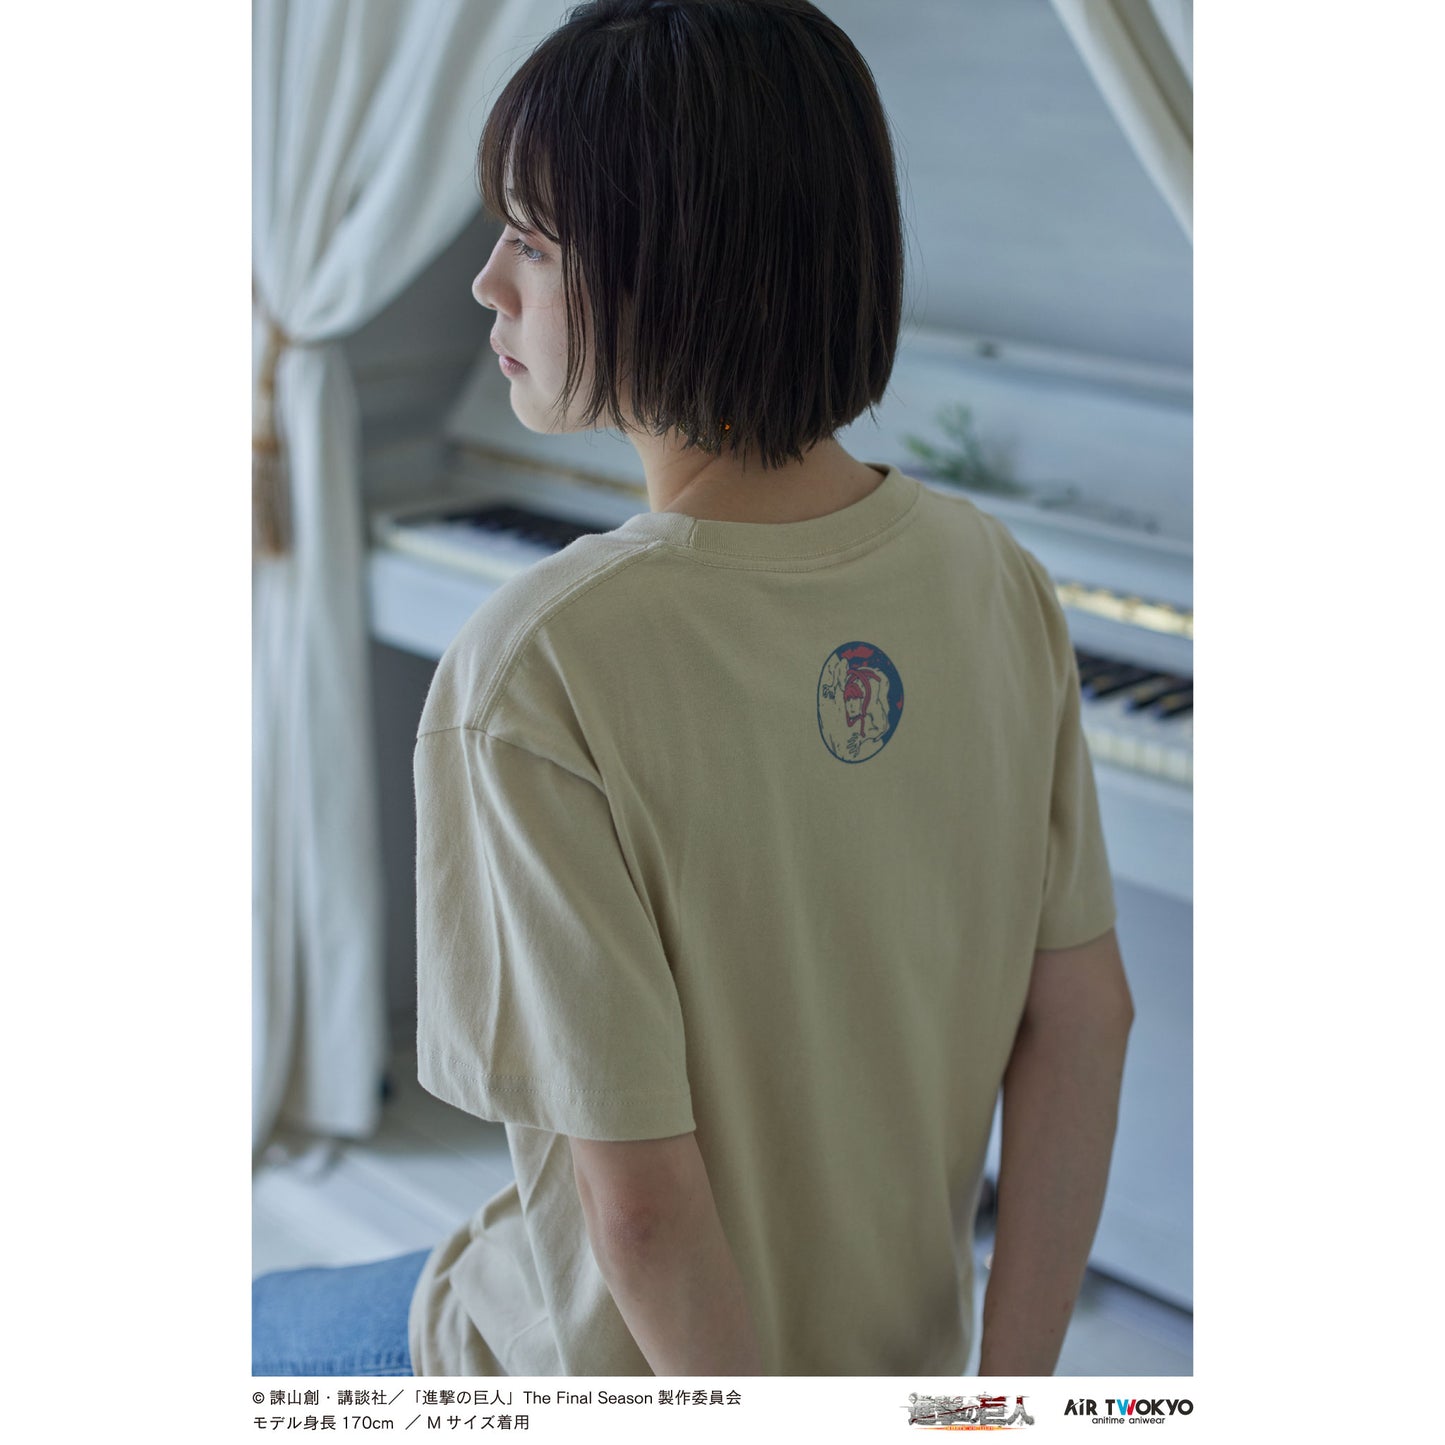 TV anime ”Attack on Titan” The Final Season Final (Part 1) Illustration T-shirt 6 (”How exactly are you free? ”)